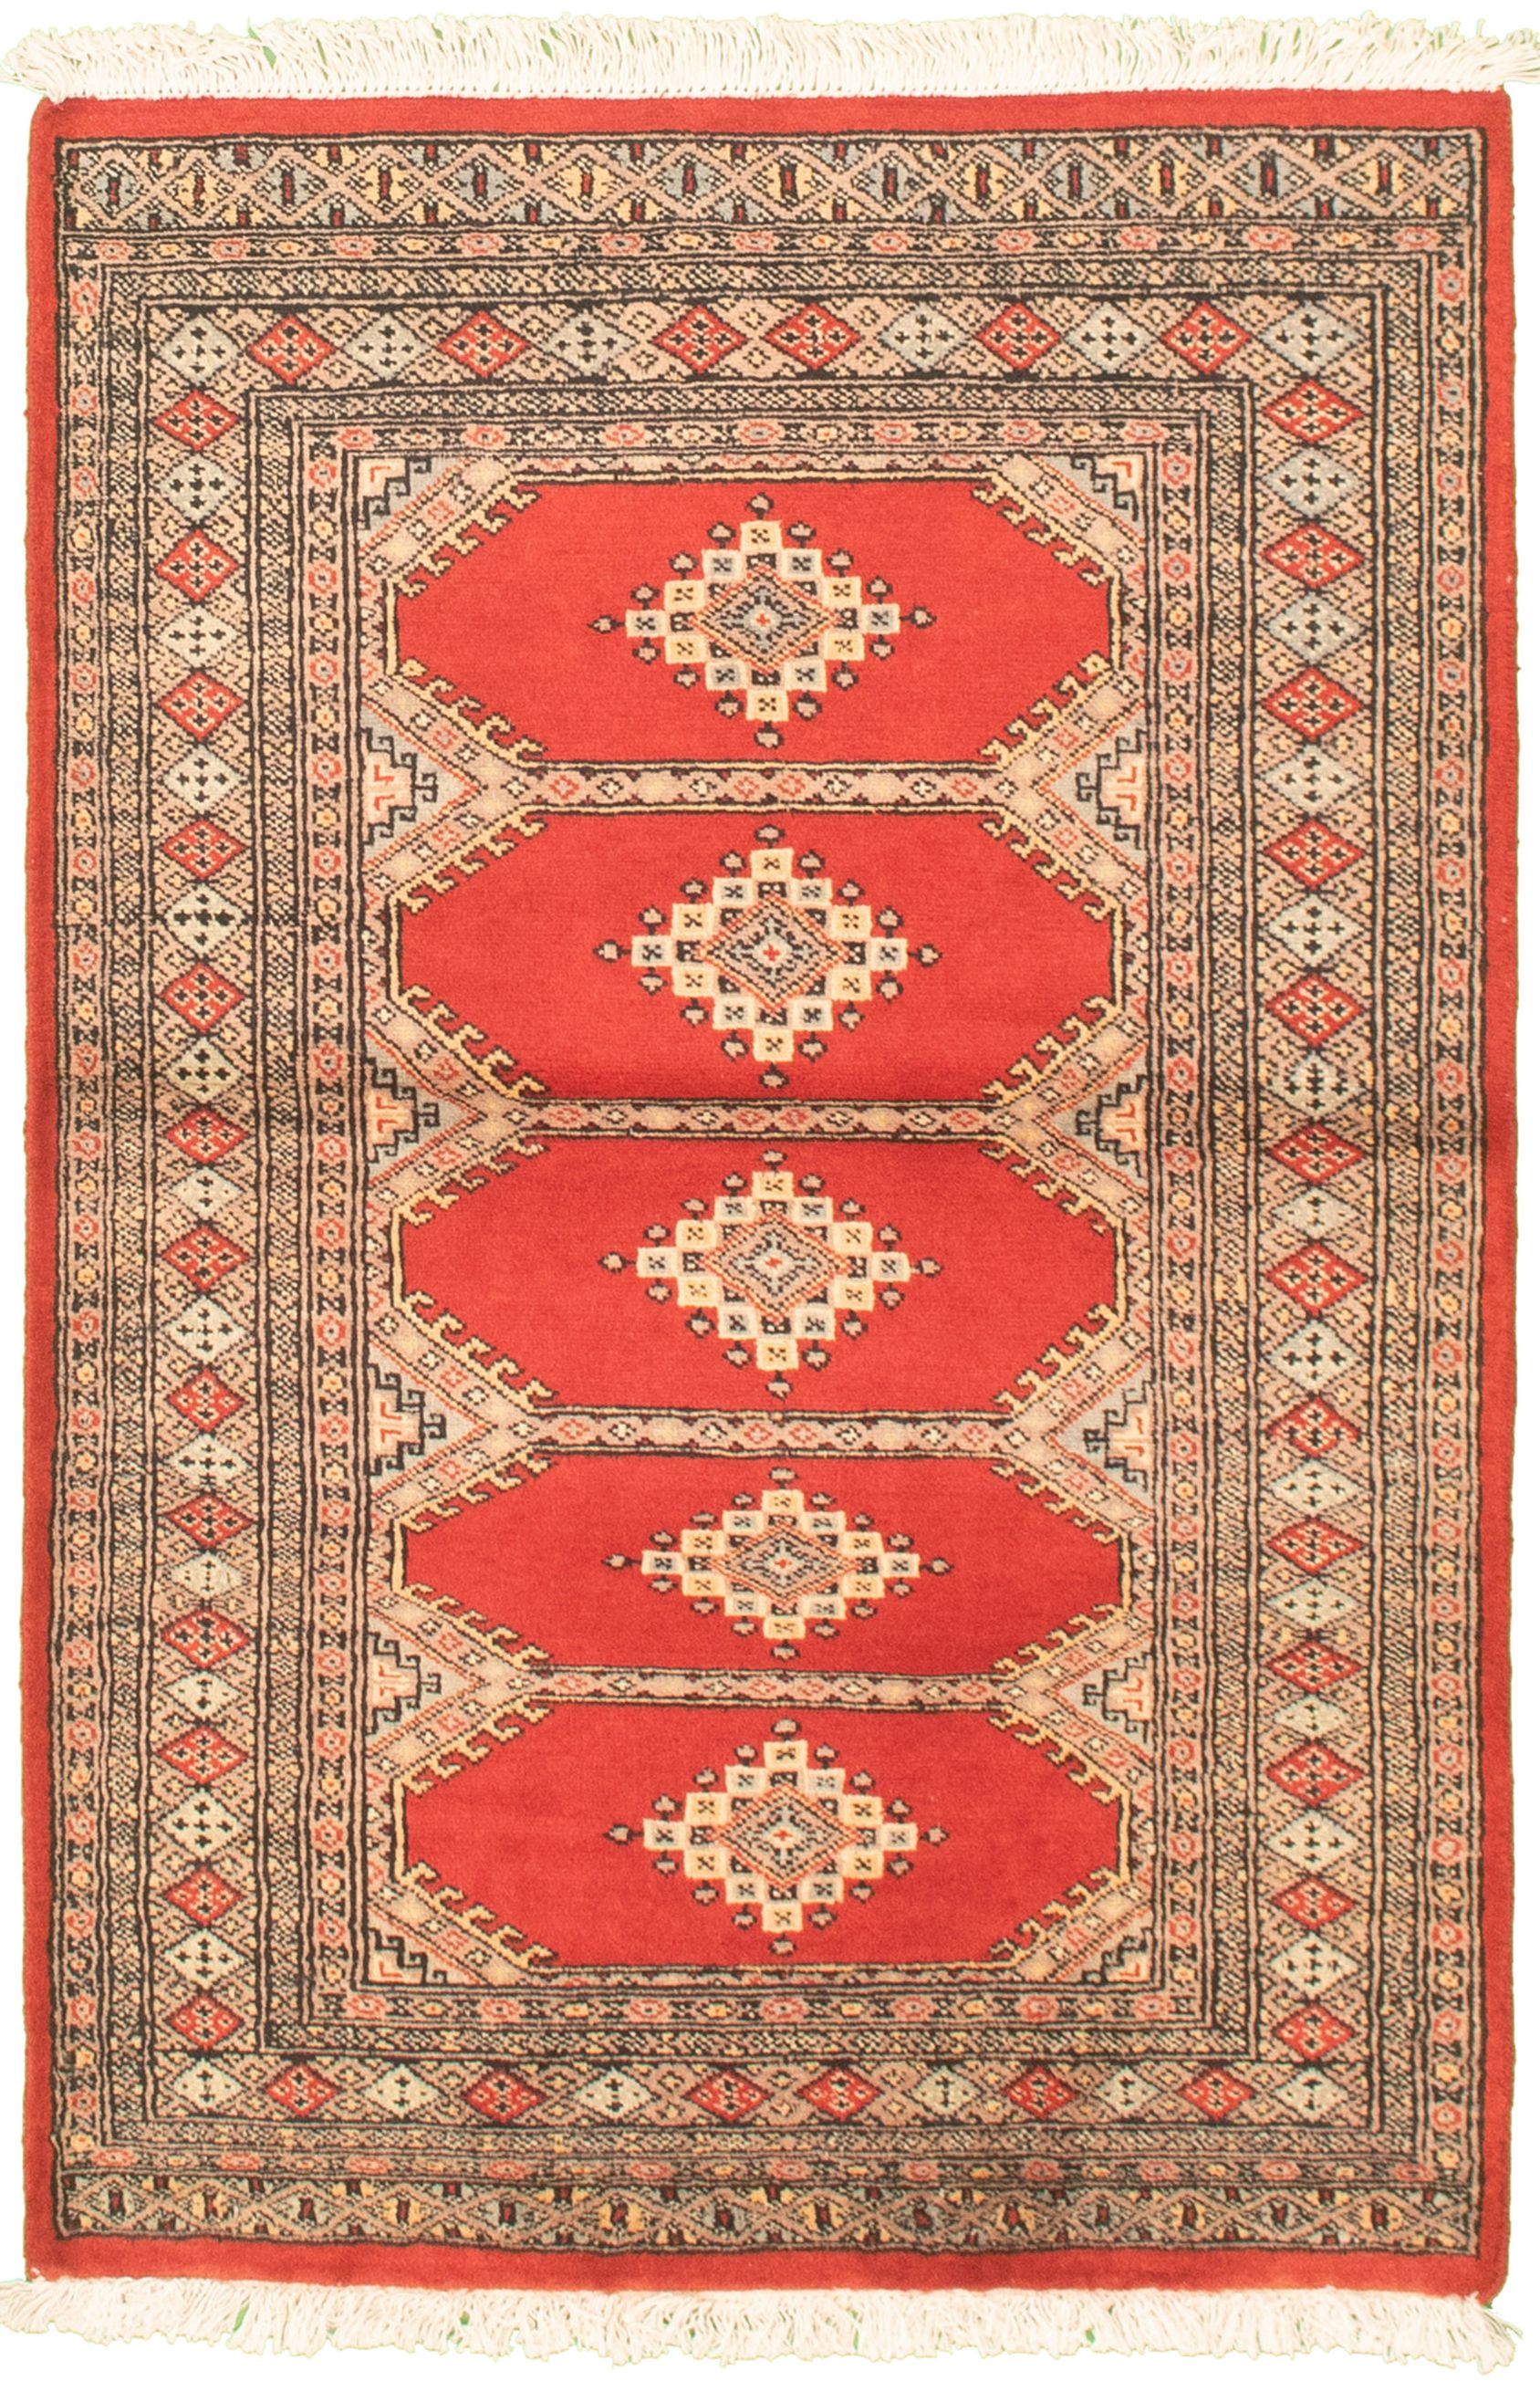 Hand-knotted Finest Peshawar Bokhara Red Wool Rug 3'2" x 4'11"  Size: 3'2" x 4'11"  